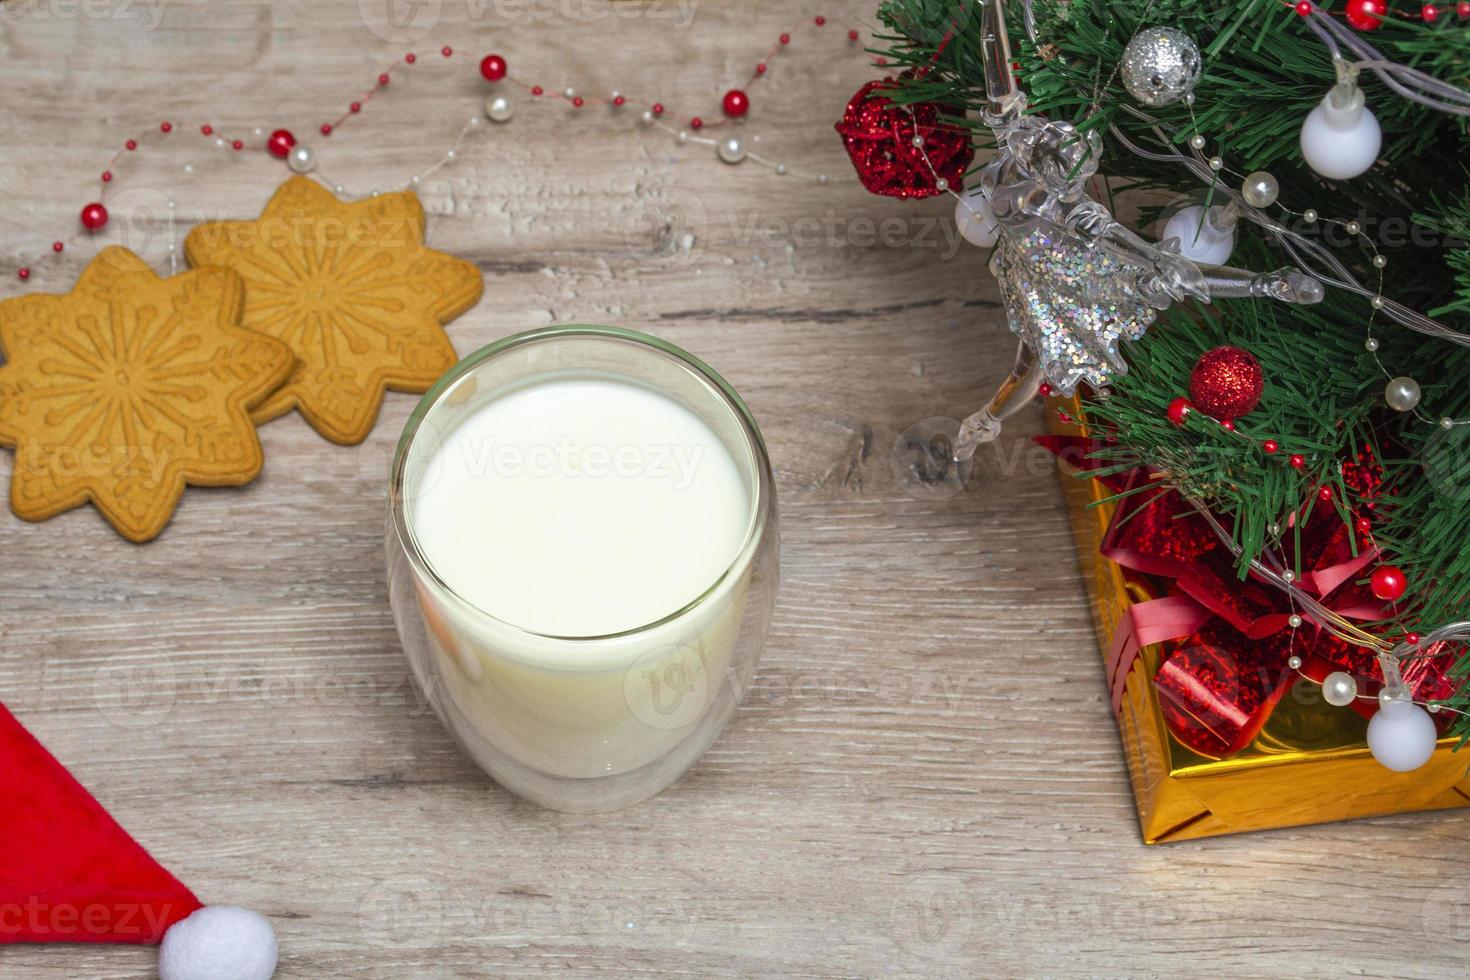 Christmas milk and gingerbread for Santa. A large glass with milk and holiday decorations. Photo of a Christmas drink on a wooden background. Close-up